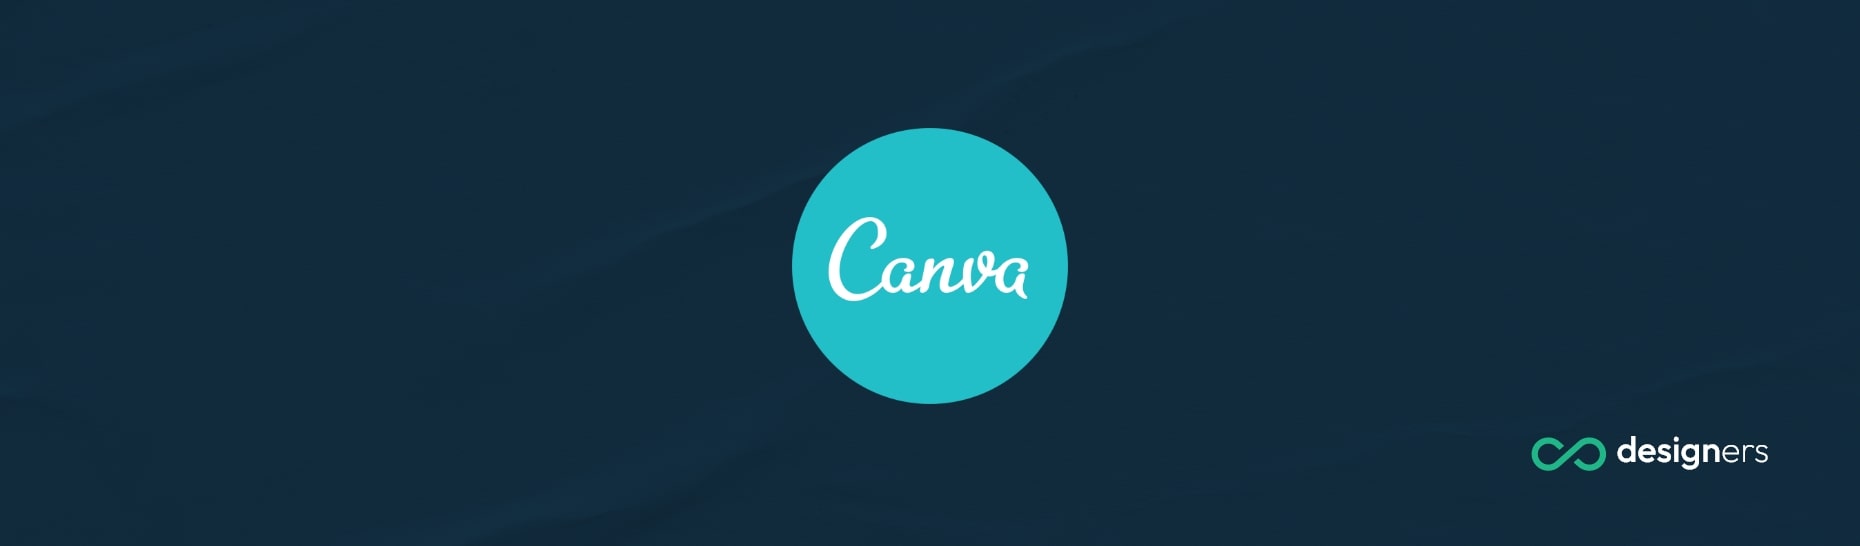 How Do I Change the Speed of an Animation in Canva?